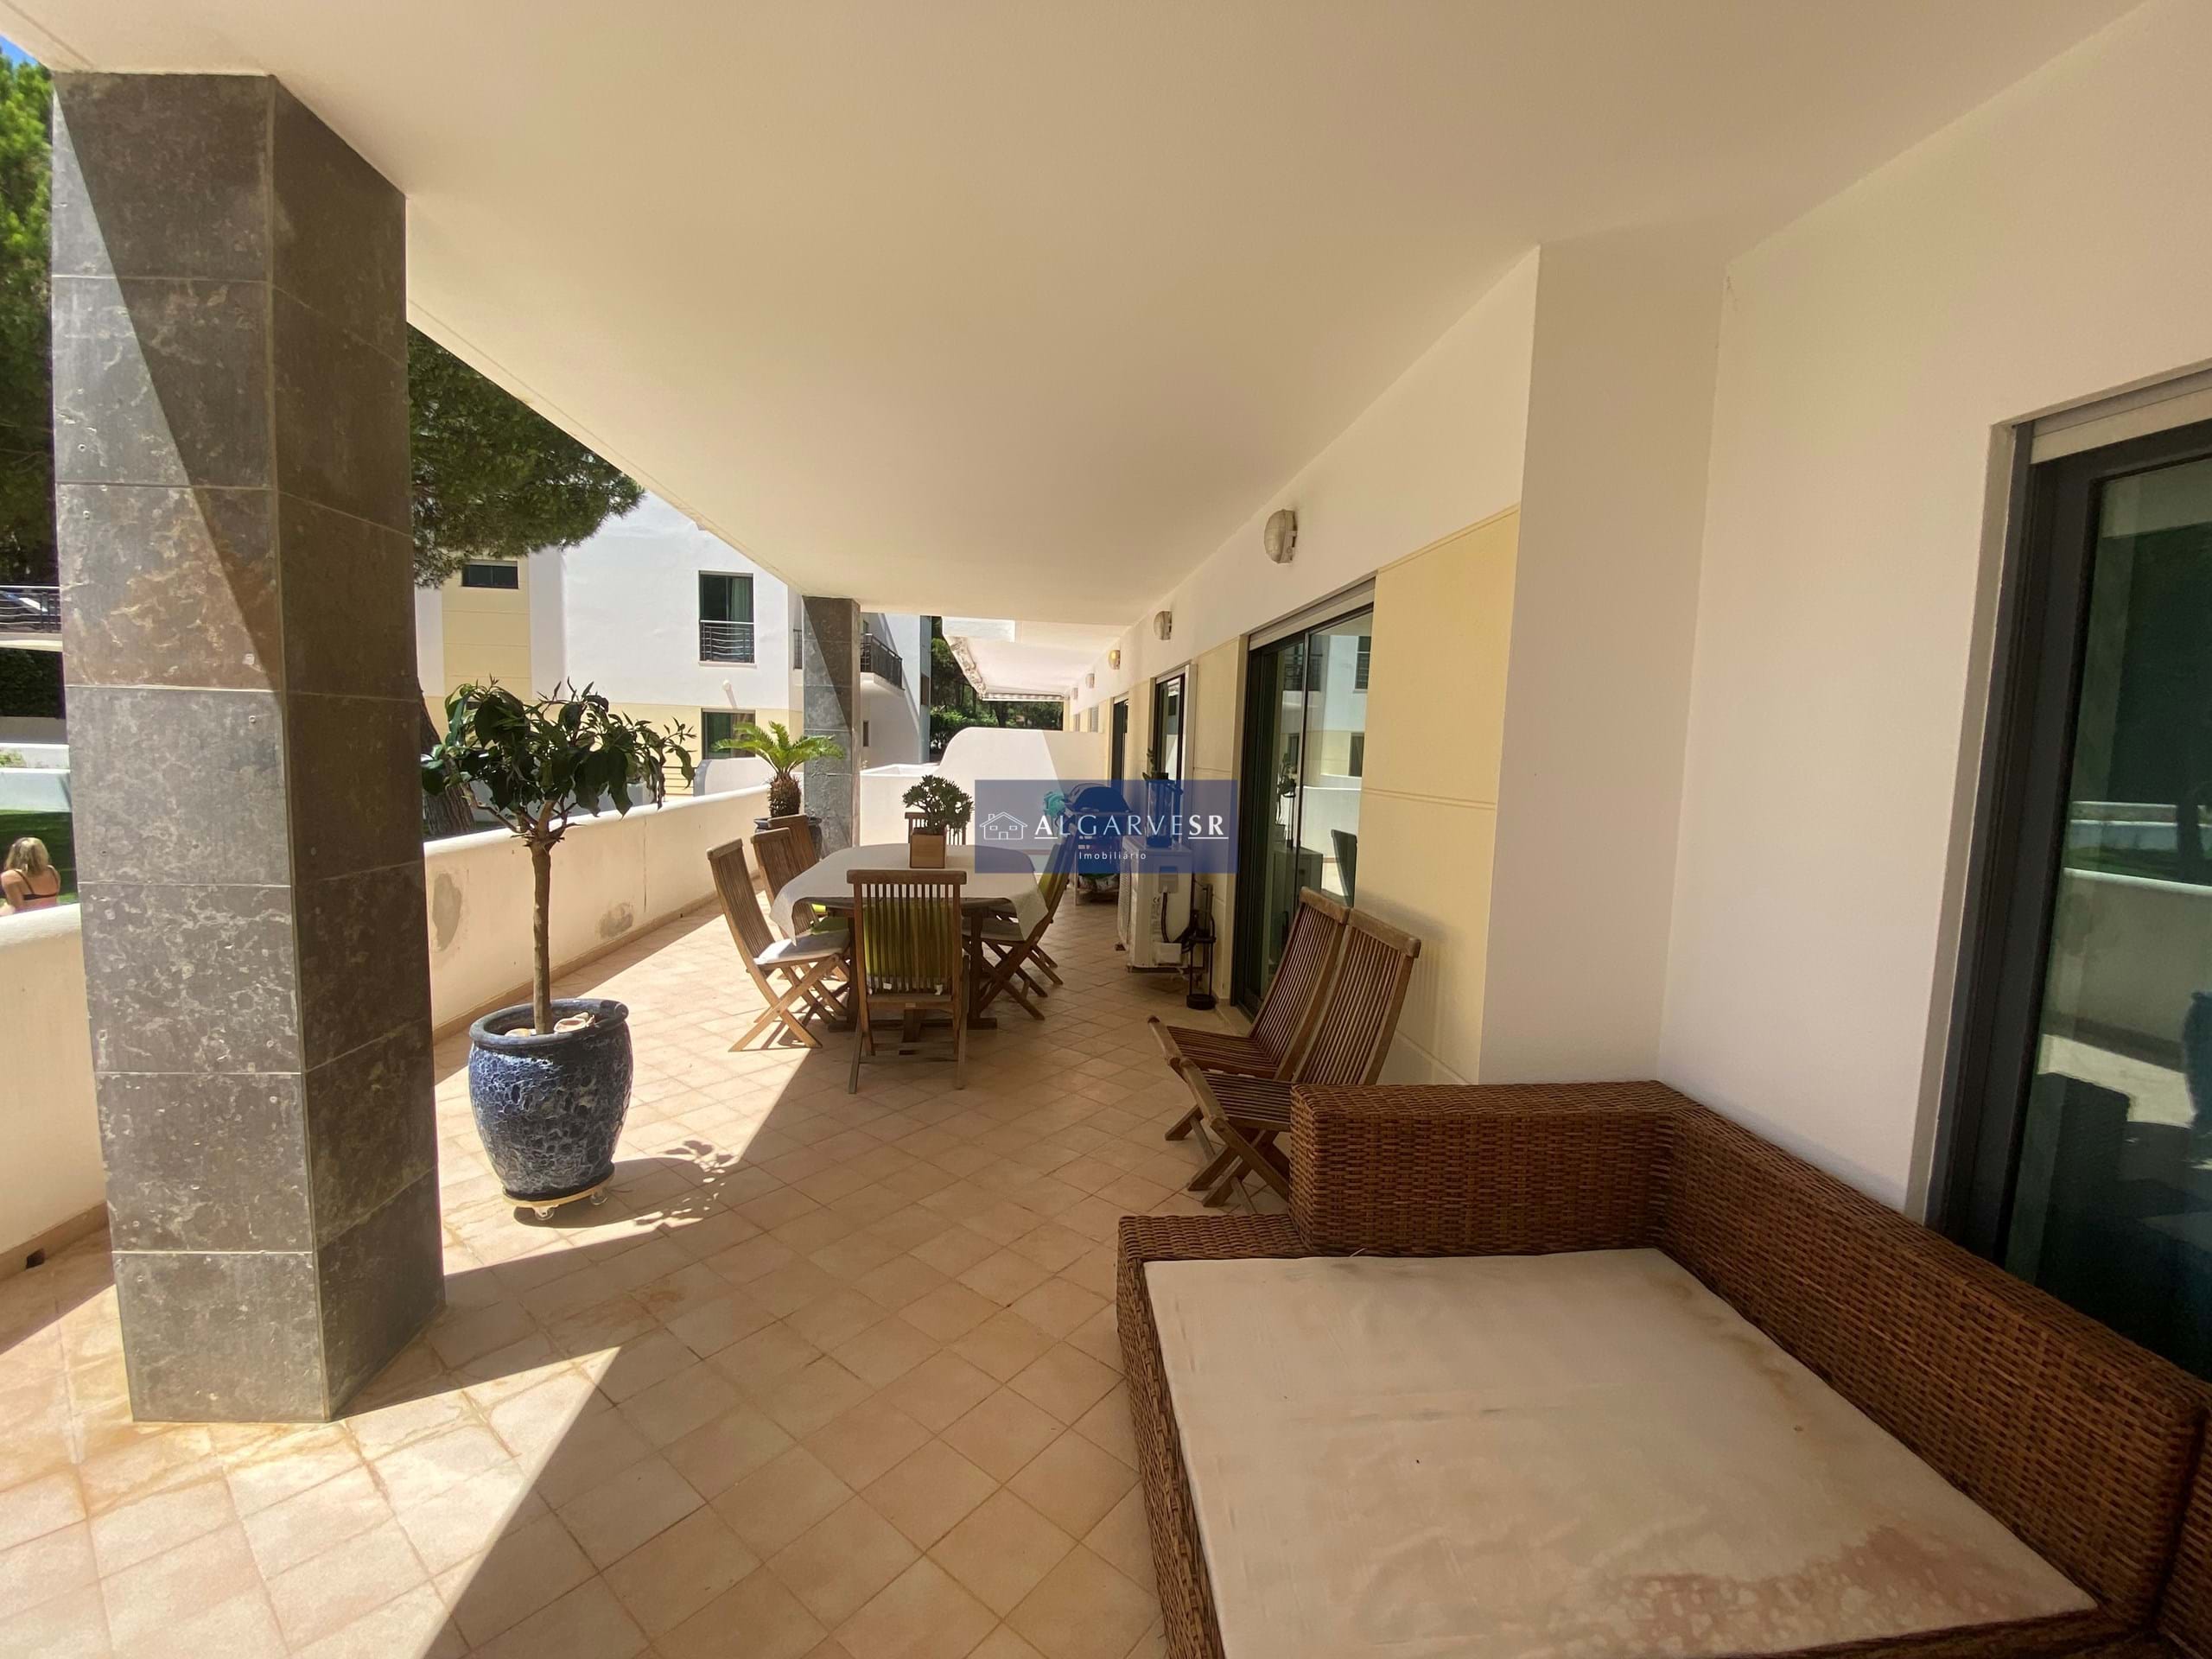 Fabulous three bedroom apartment on luxury complex, few moments from Falesia beach